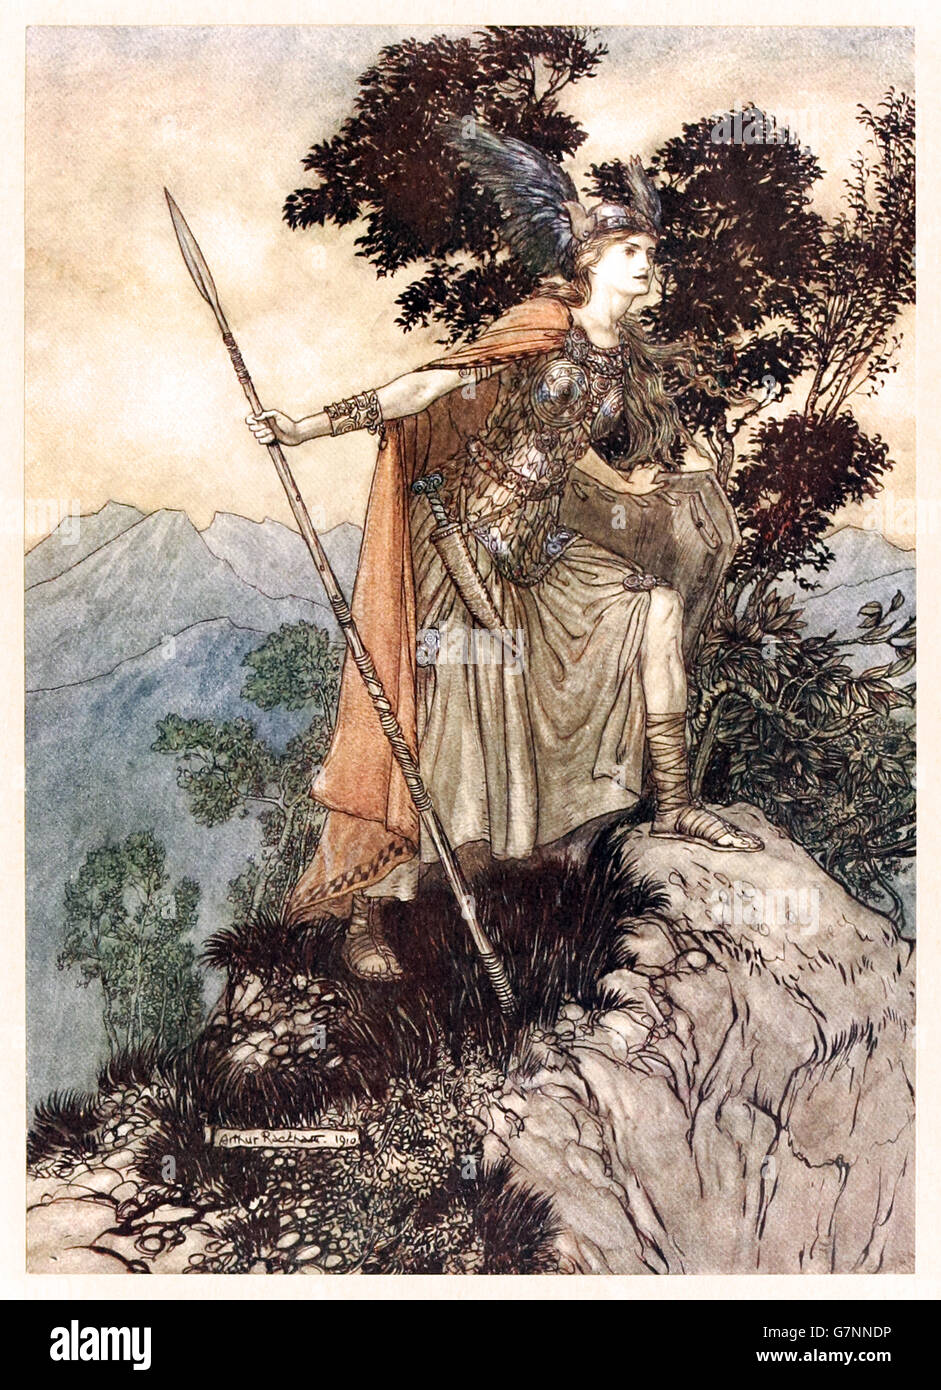 “Brunnhilde” from ‘The Rhinegold & the Valkyrie’ illustrated by Arthur Rackham (1867-1939), published in 1910. Brunnhilde looks down on Siegmund and Sieglinde in the valley below. Stock Photo